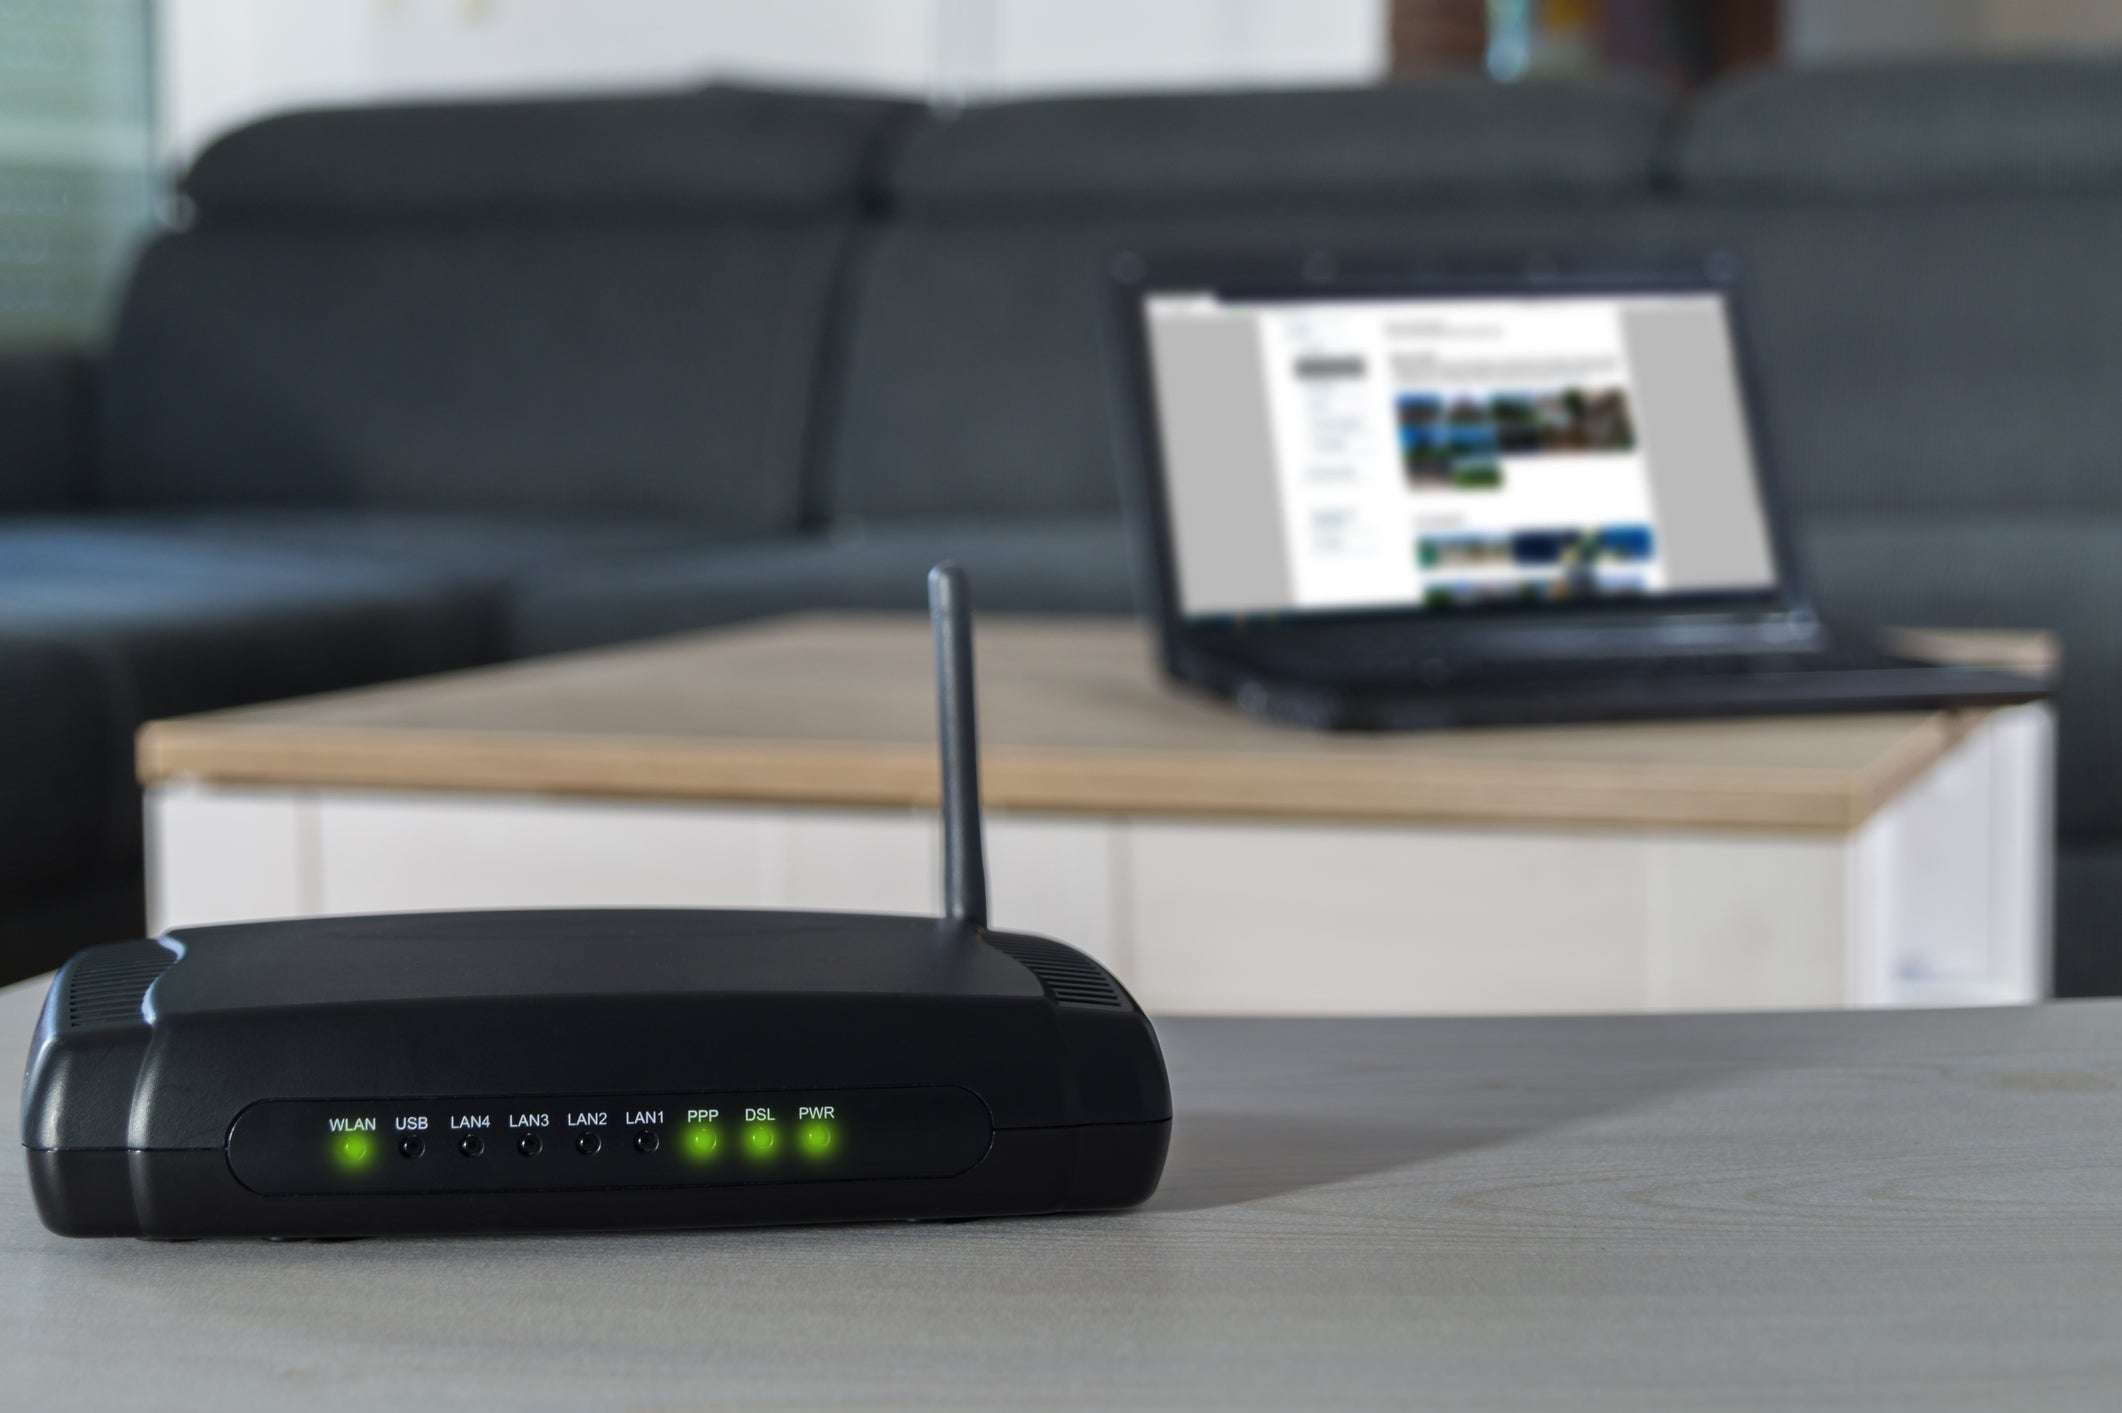 How to Trouble Shoot Problems With a WiFi Service